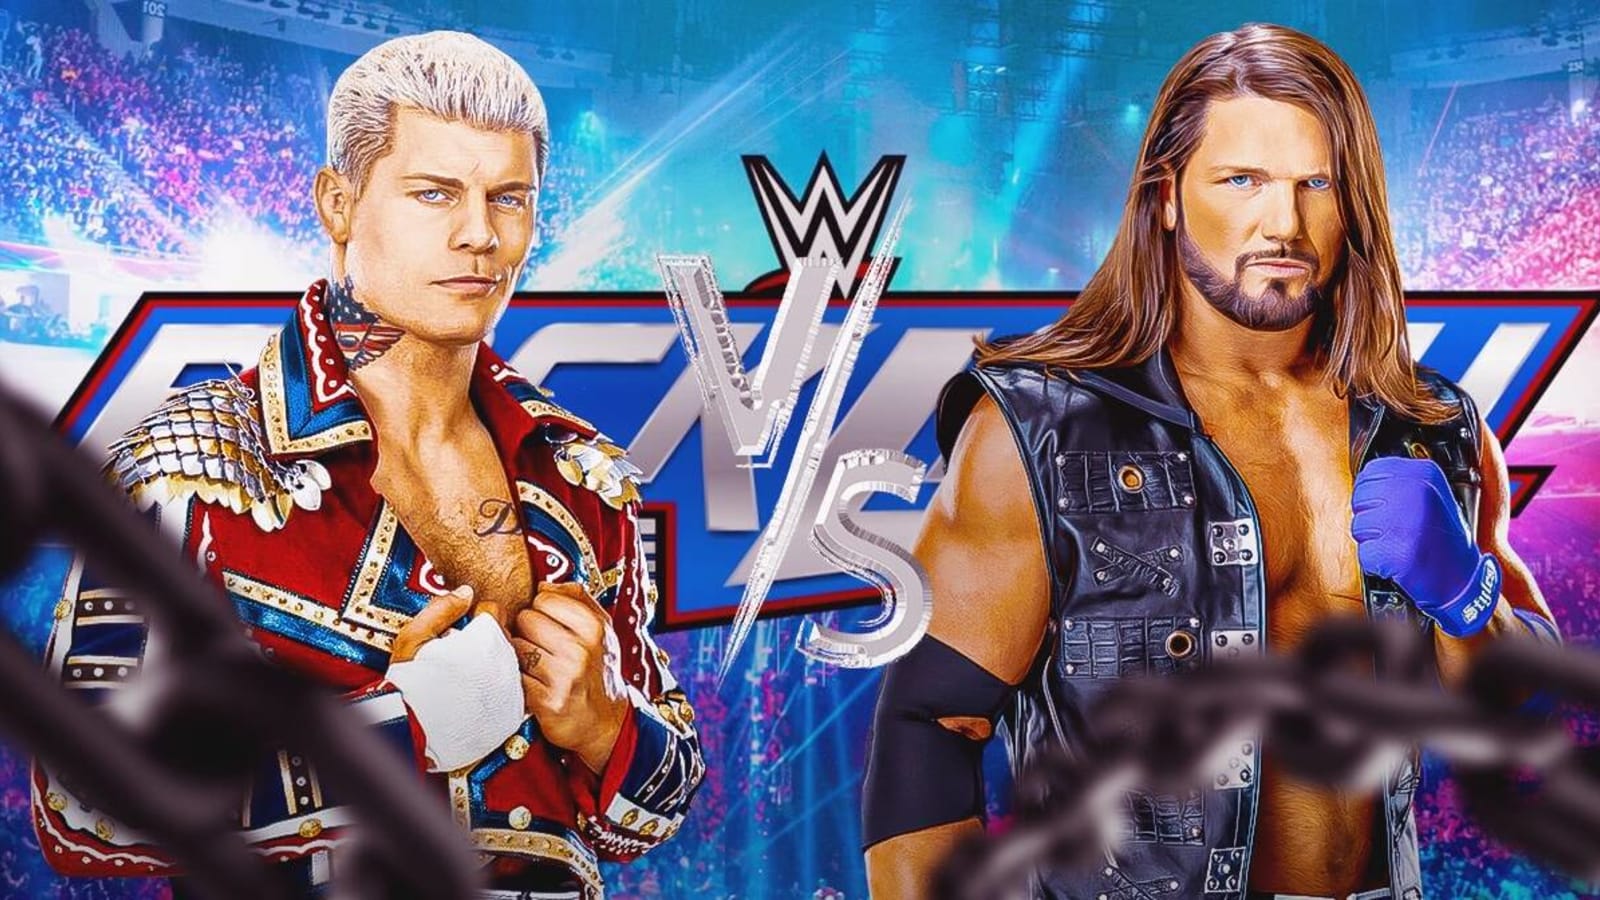 Cody Rhodes finds no Southern hospitality from AJ Styles ahead of WWE Backlash